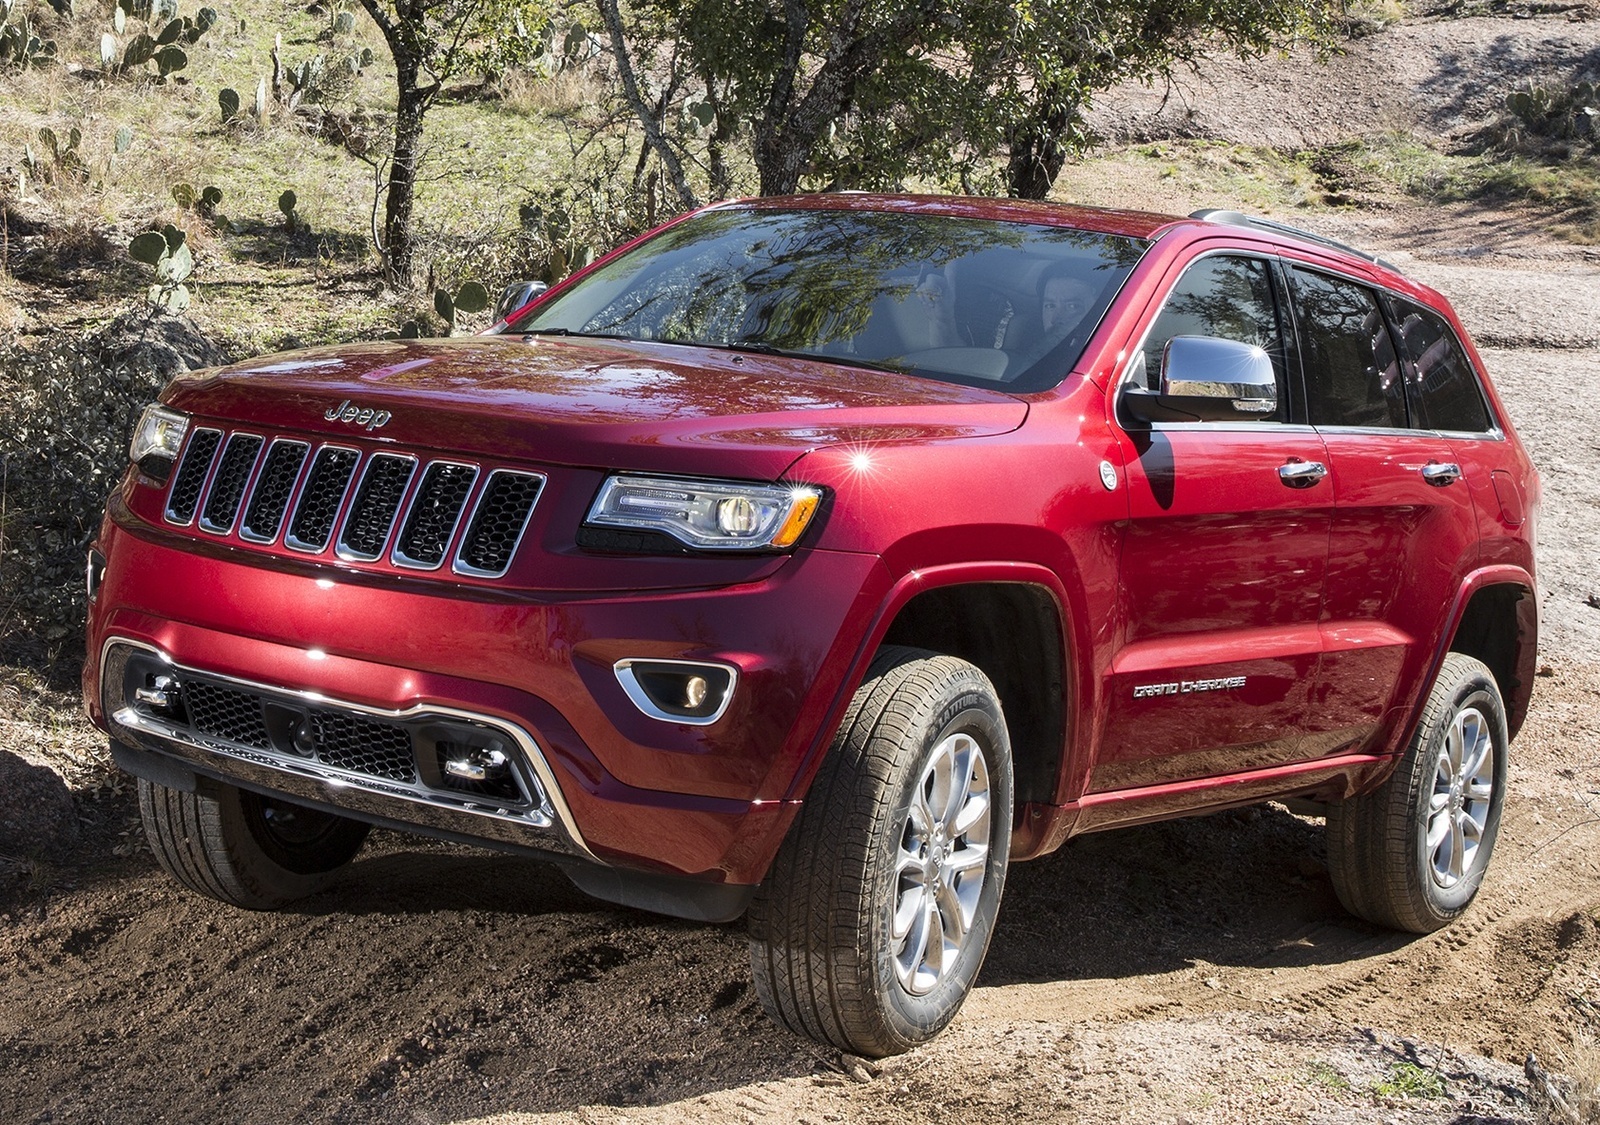 2015 Jeep Grand Cherokee: Prices, Reviews & Pictures - CarGurus